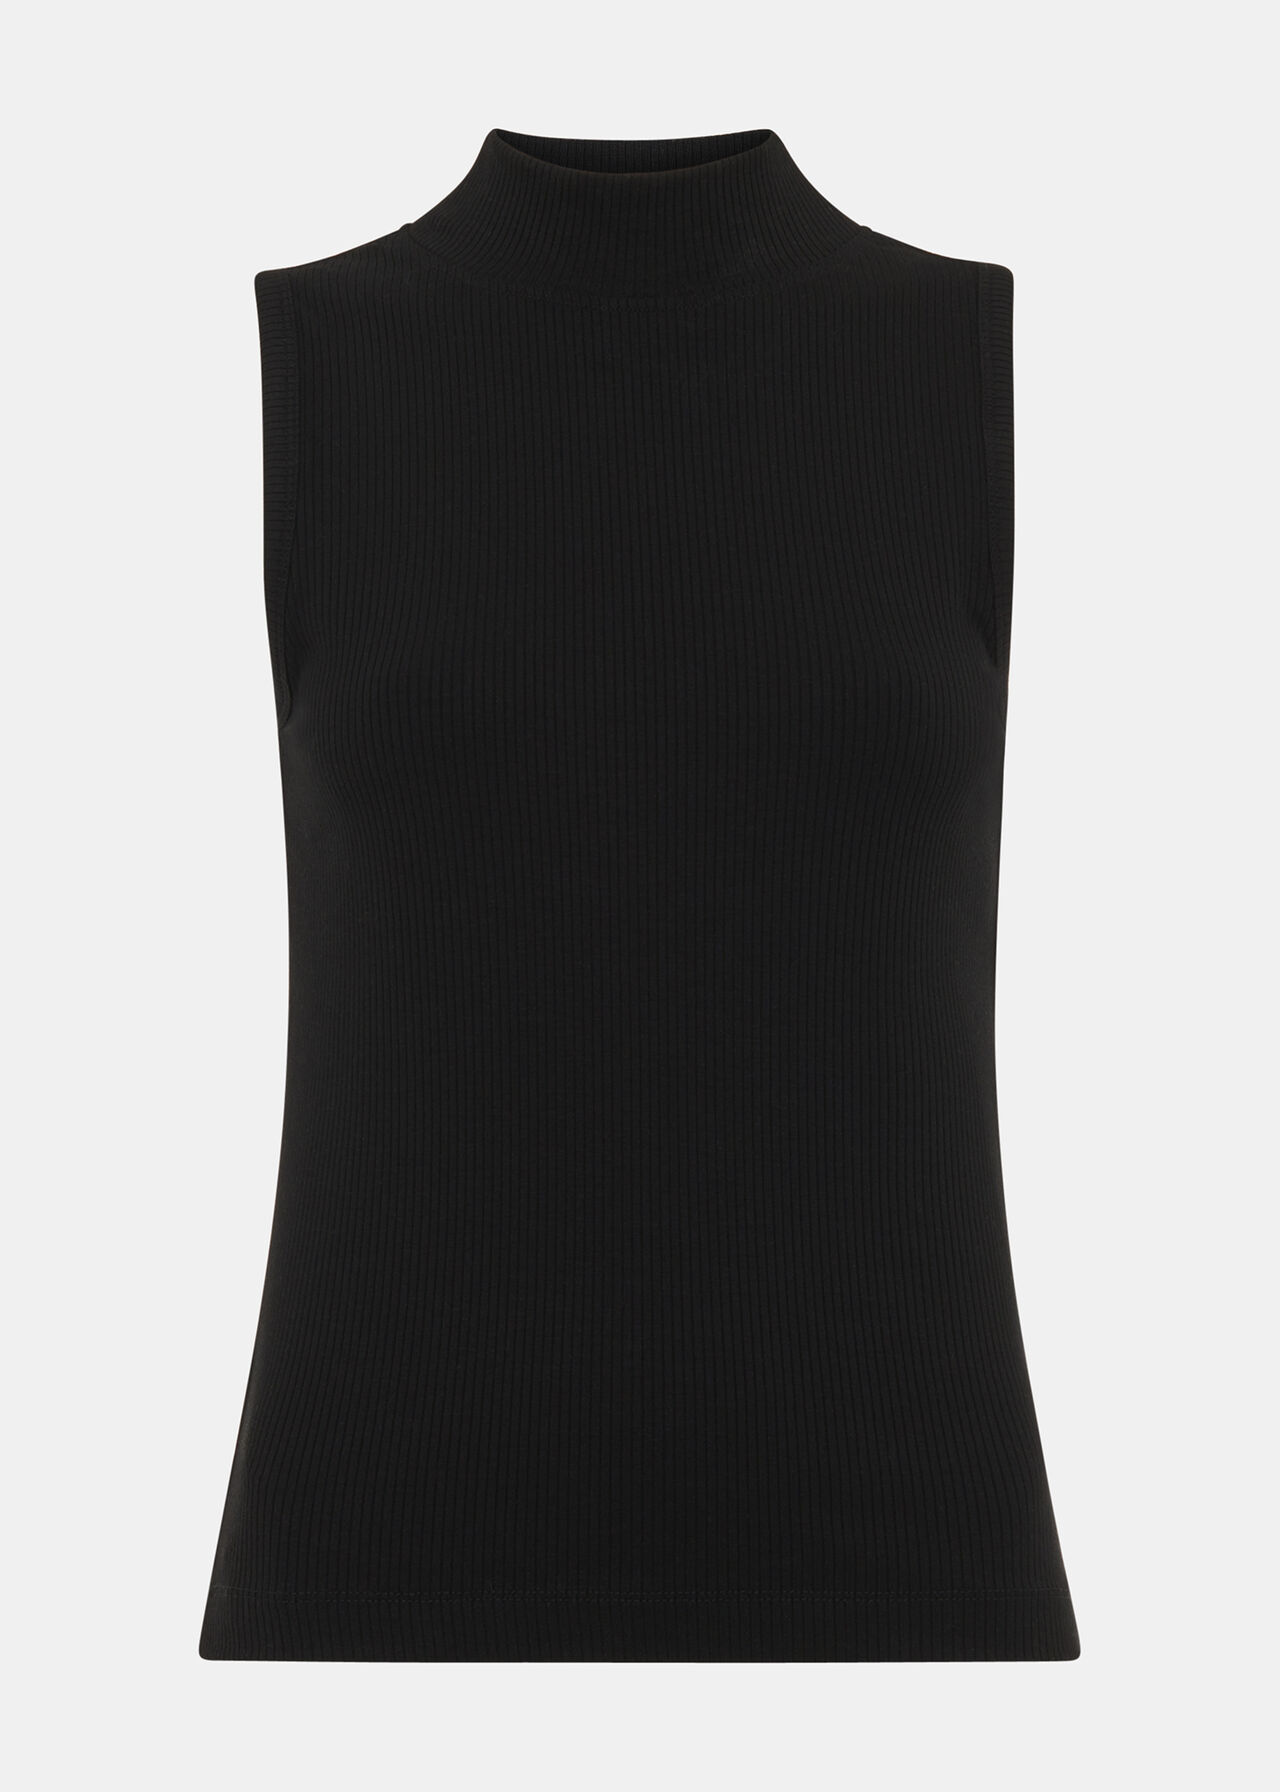 Black Keyhole Cut Out Top | WHISTLES | Whistles UK